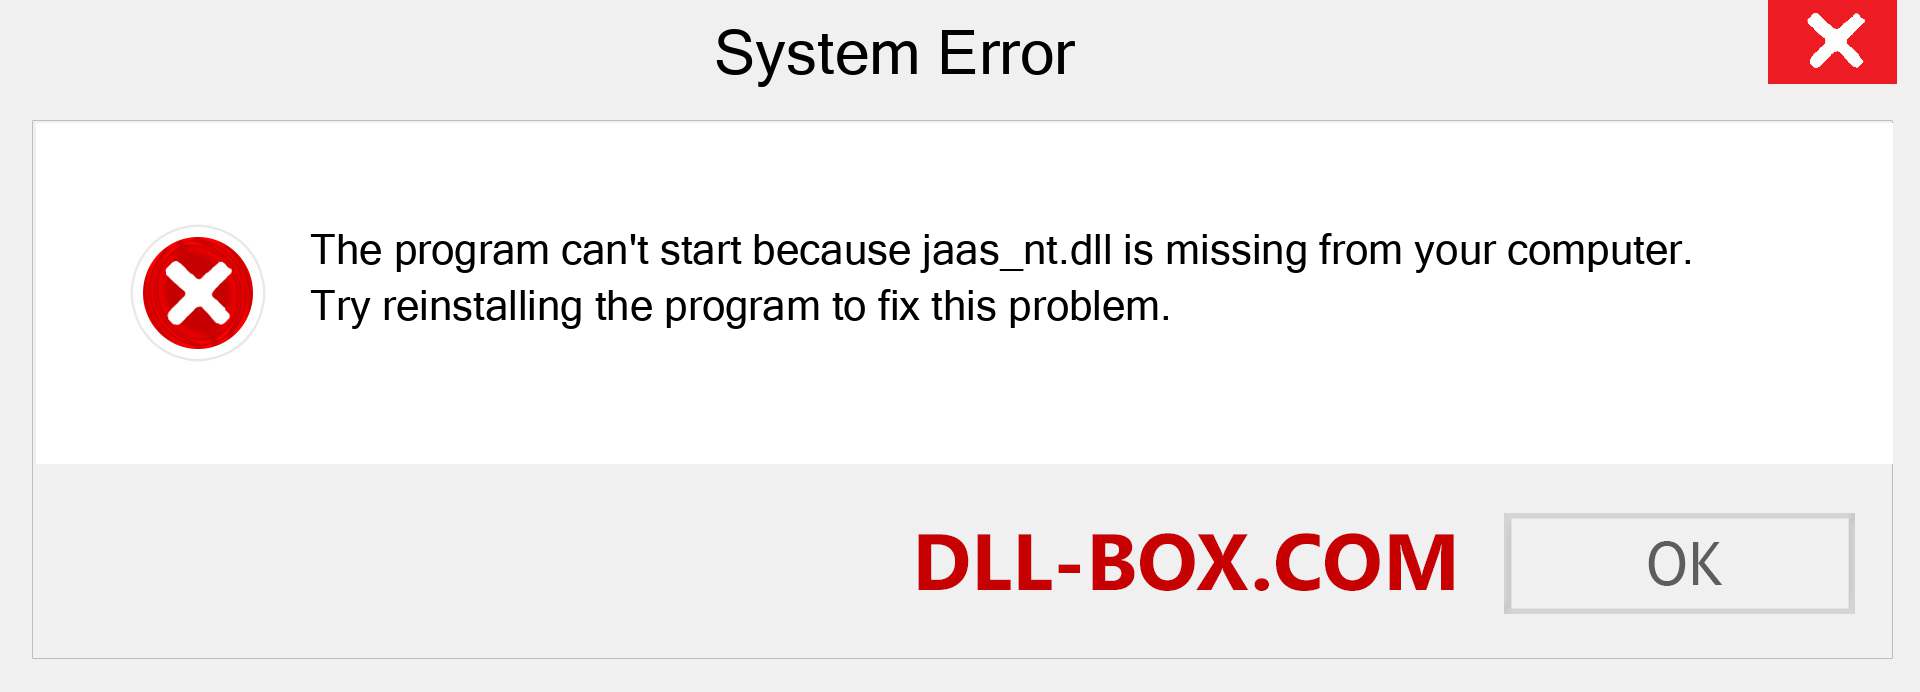  jaas_nt.dll file is missing?. Download for Windows 7, 8, 10 - Fix  jaas_nt dll Missing Error on Windows, photos, images